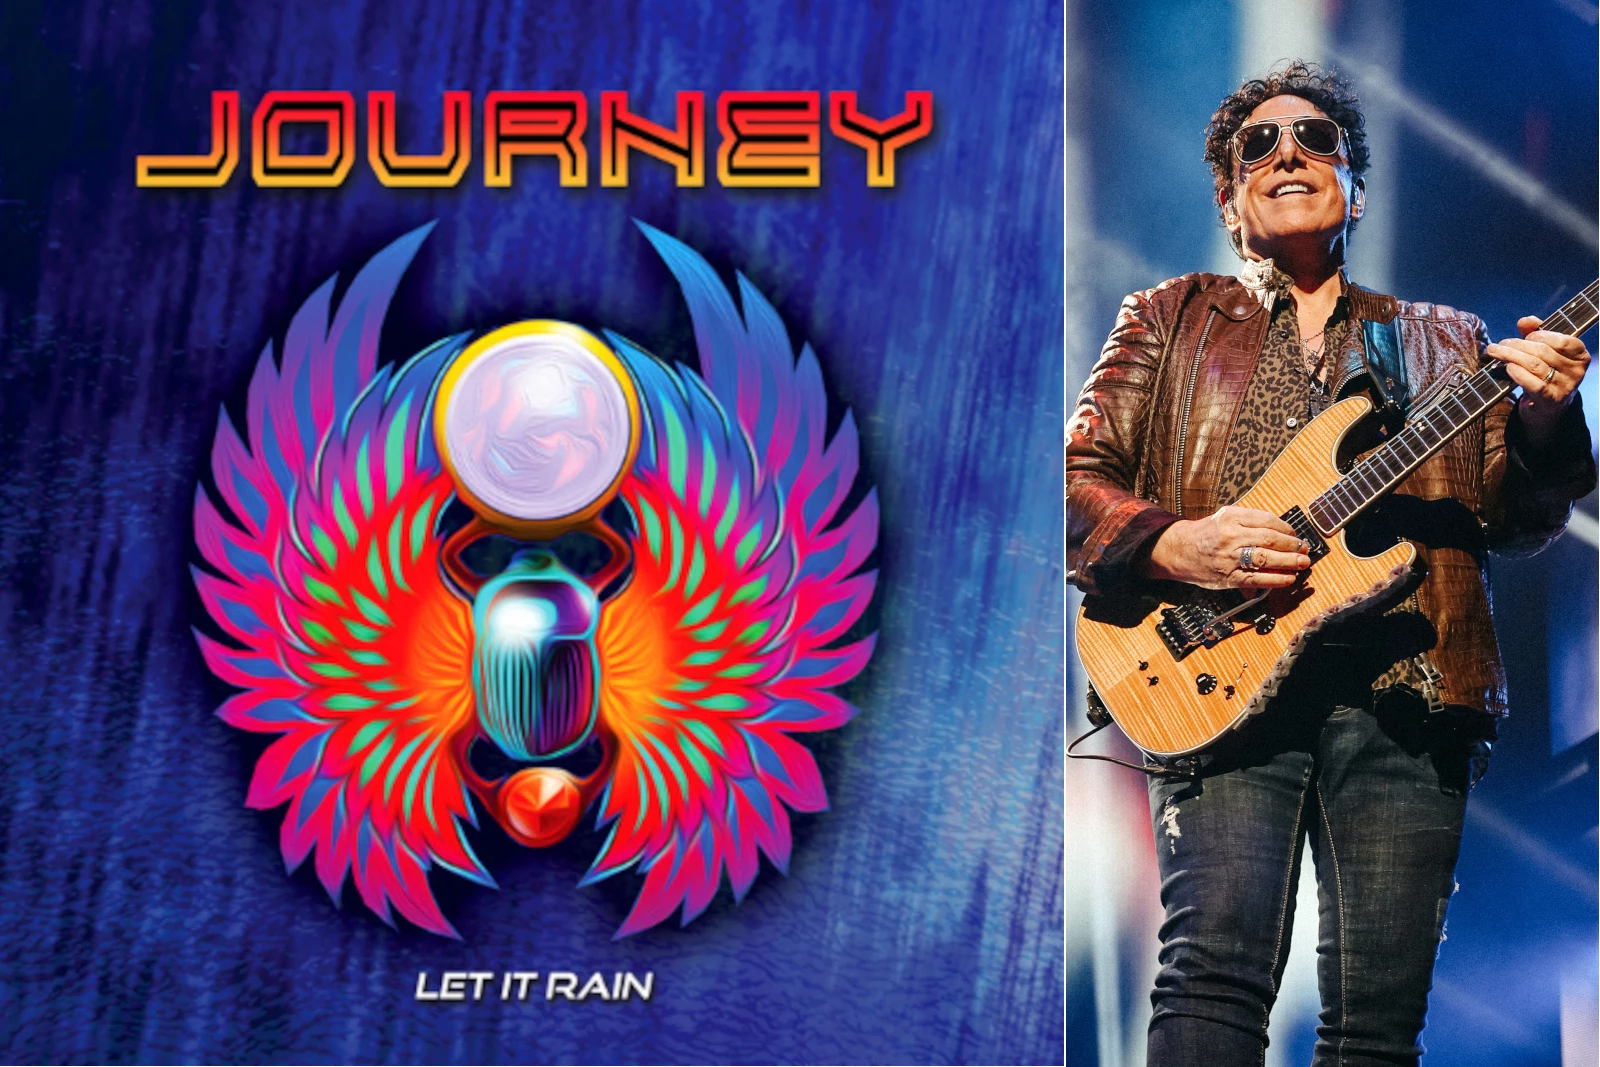 Listen to Journey’s New Song 'Let It Rain'